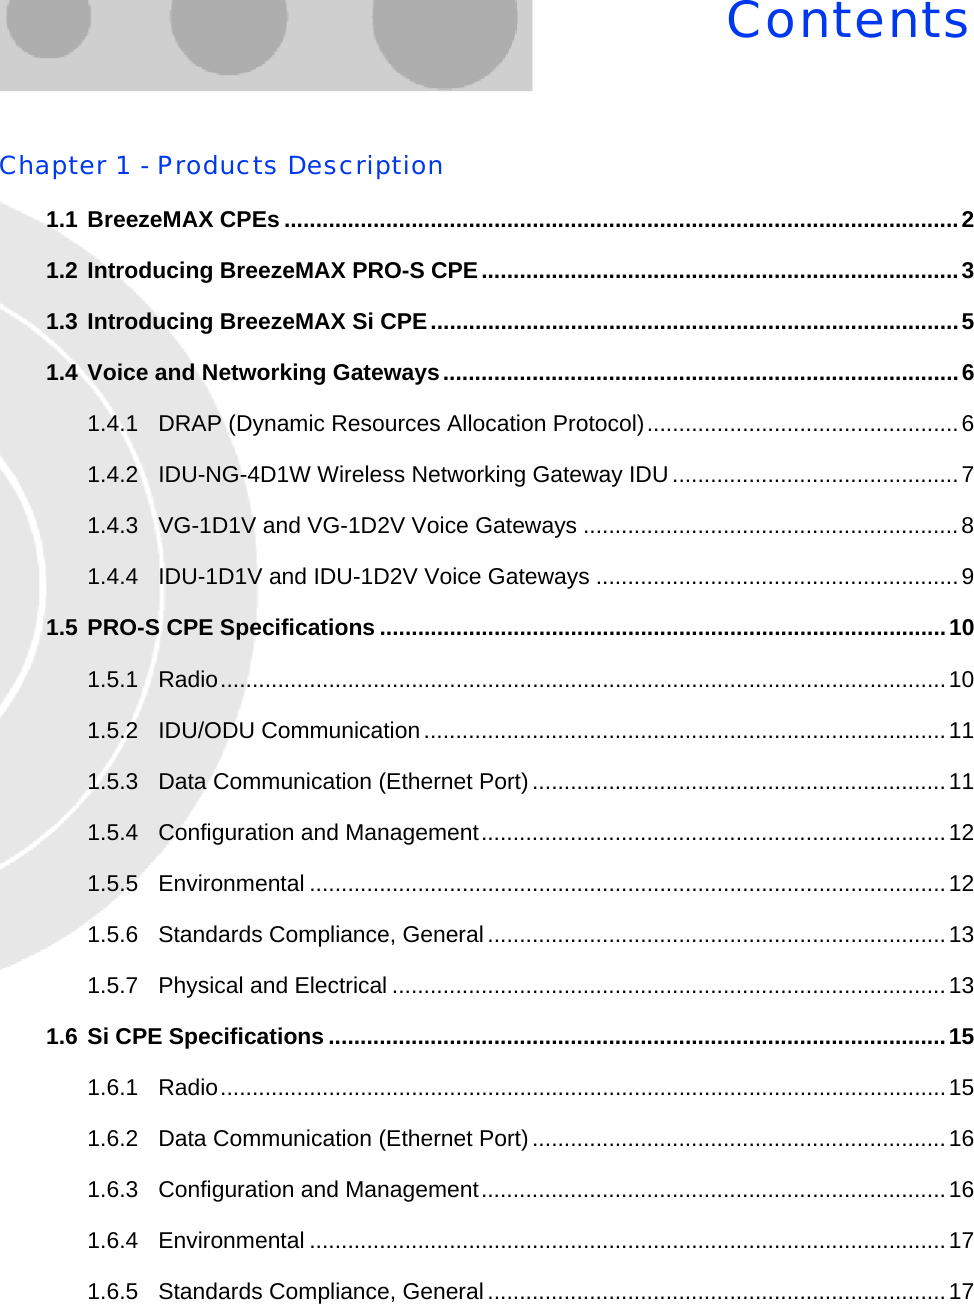 ContentsChapter 1 - Products Description1.1 BreezeMAX CPEs ..........................................................................................................21.2 Introducing BreezeMAX PRO-S CPE...........................................................................31.3 Introducing BreezeMAX Si CPE...................................................................................51.4 Voice and Networking Gateways.................................................................................61.4.1 DRAP (Dynamic Resources Allocation Protocol).................................................61.4.2 IDU-NG-4D1W Wireless Networking Gateway IDU.............................................71.4.3 VG-1D1V and VG-1D2V Voice Gateways ...........................................................81.4.4 IDU-1D1V and IDU-1D2V Voice Gateways .........................................................91.5 PRO-S CPE Specifications .........................................................................................101.5.1 Radio..................................................................................................................101.5.2 IDU/ODU Communication..................................................................................111.5.3 Data Communication (Ethernet Port).................................................................111.5.4 Configuration and Management.........................................................................121.5.5 Environmental ....................................................................................................121.5.6 Standards Compliance, General........................................................................131.5.7 Physical and Electrical .......................................................................................131.6 Si CPE Specifications .................................................................................................151.6.1 Radio..................................................................................................................151.6.2 Data Communication (Ethernet Port).................................................................161.6.3 Configuration and Management.........................................................................161.6.4 Environmental ....................................................................................................171.6.5 Standards Compliance, General........................................................................17